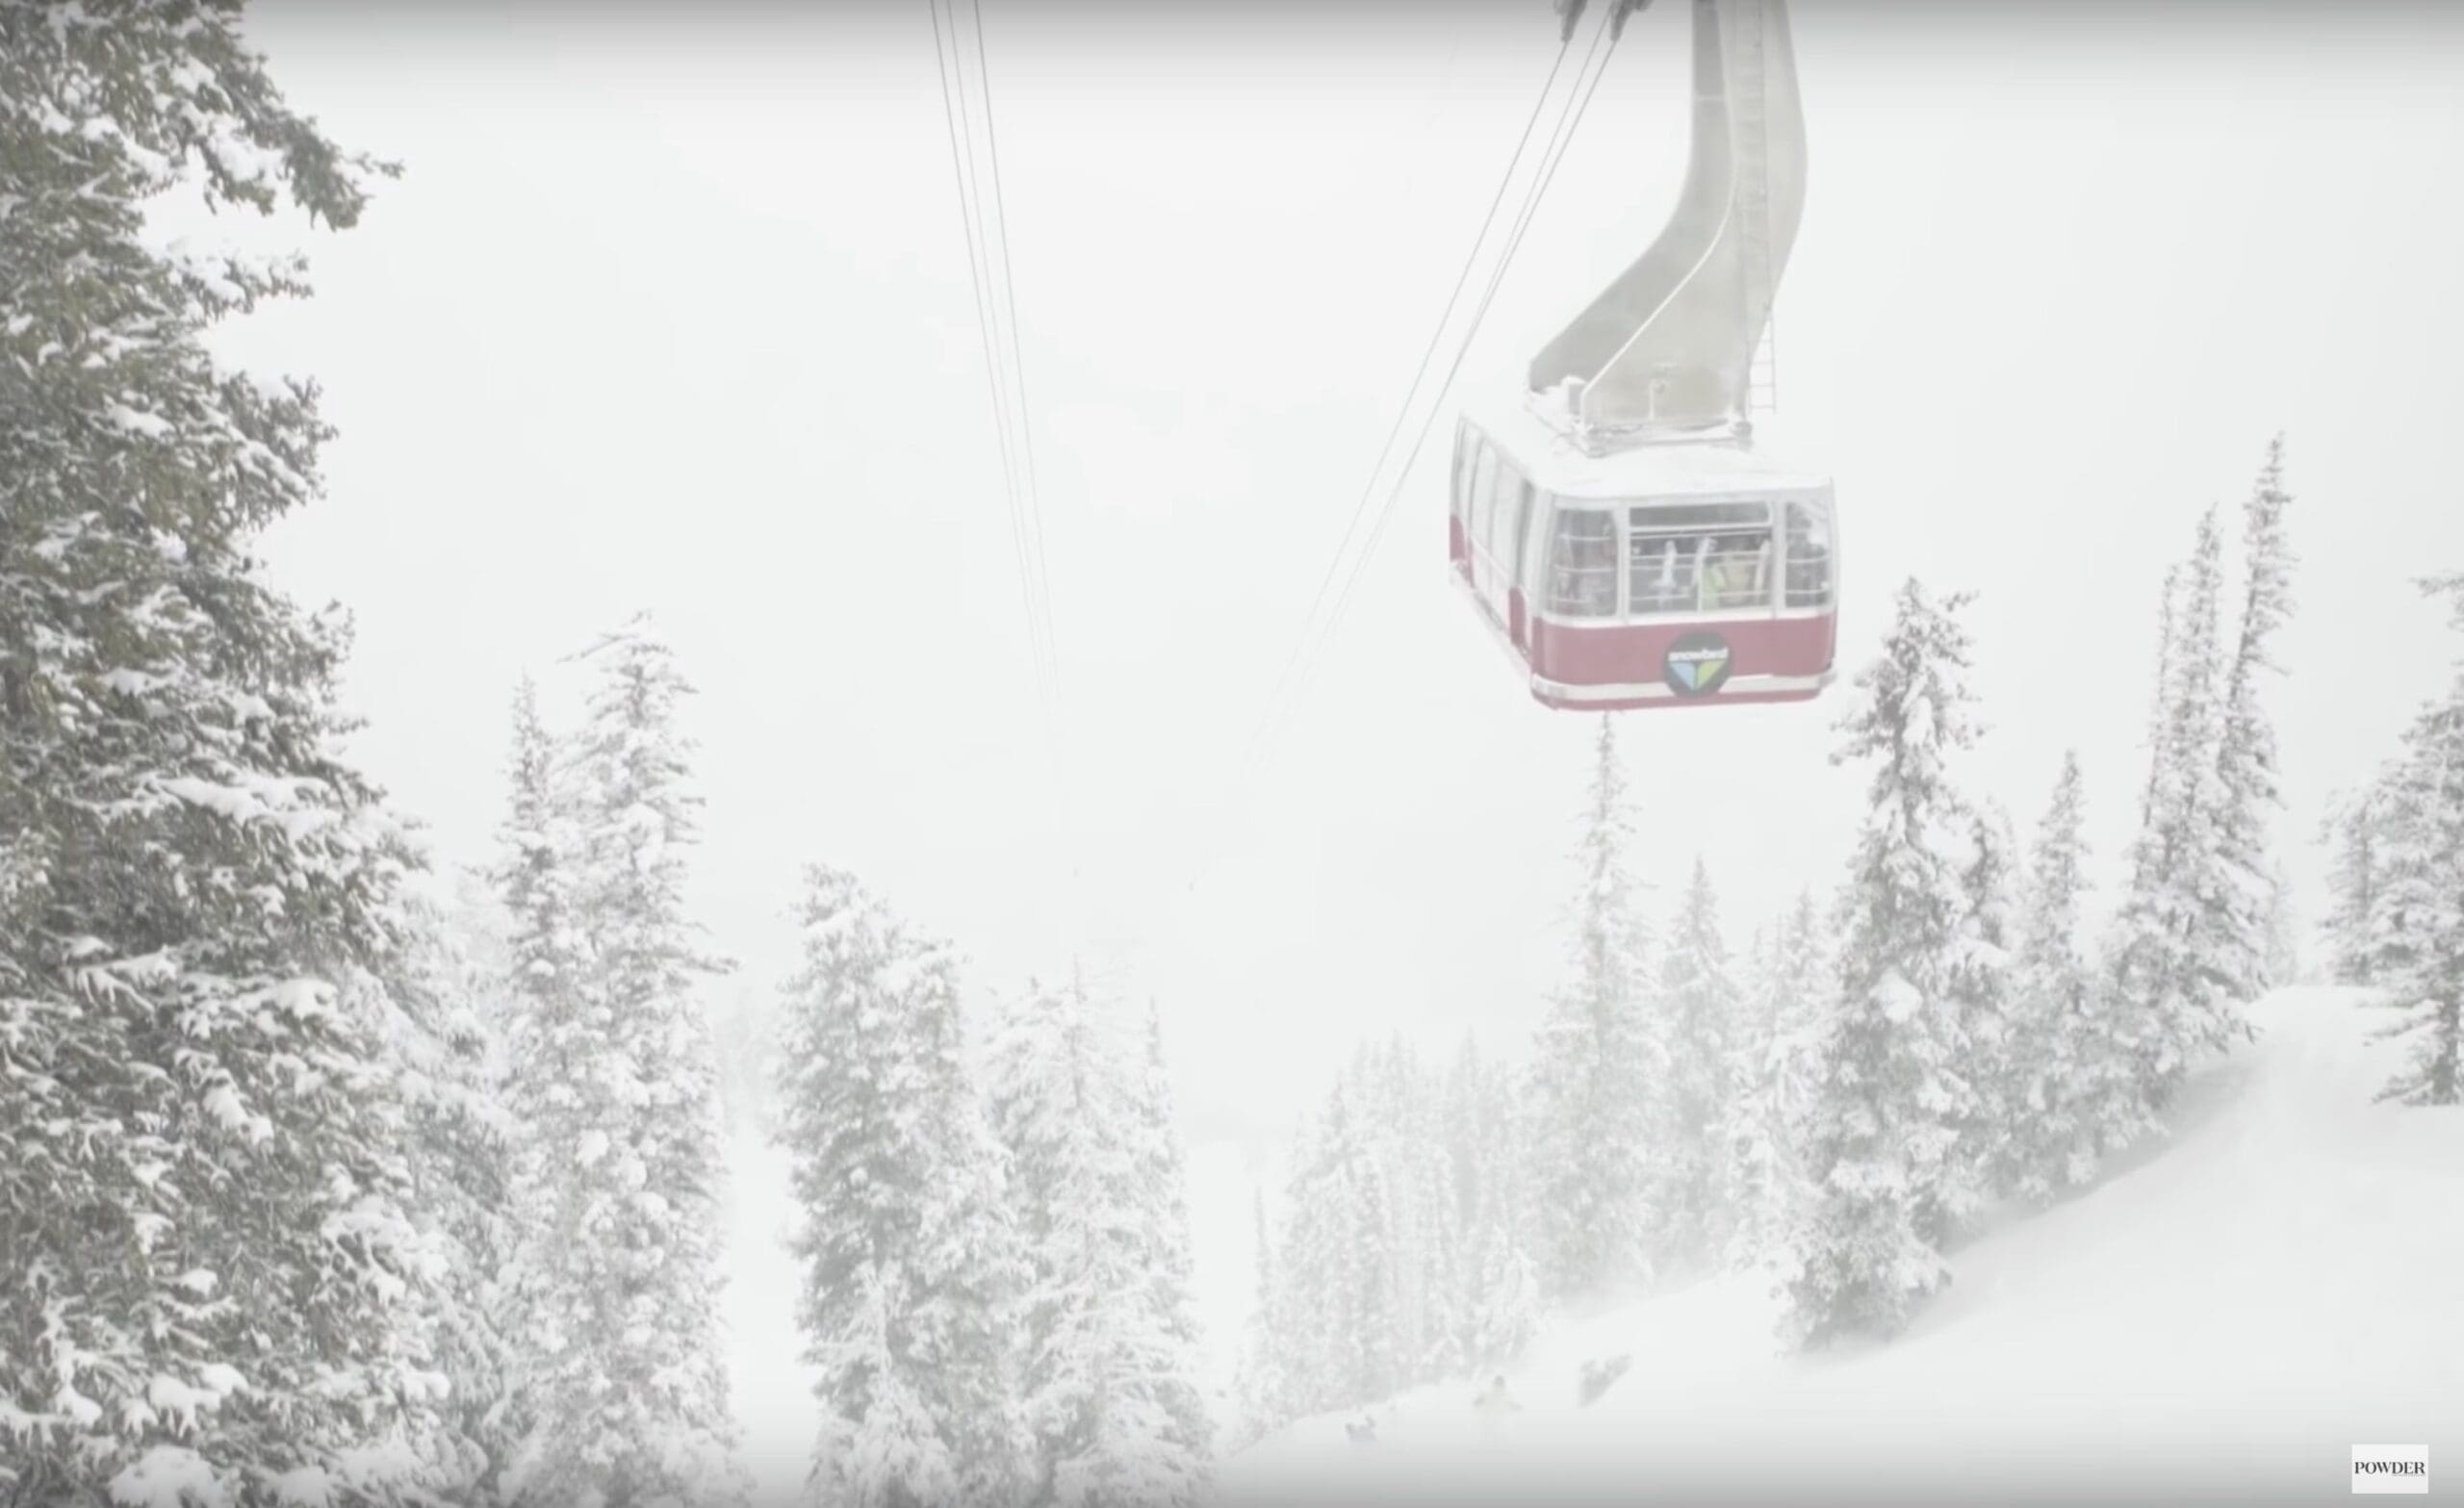 Iconic Lifts The Snowbird Tram Best Tram In North America [video From Powder] Unofficial